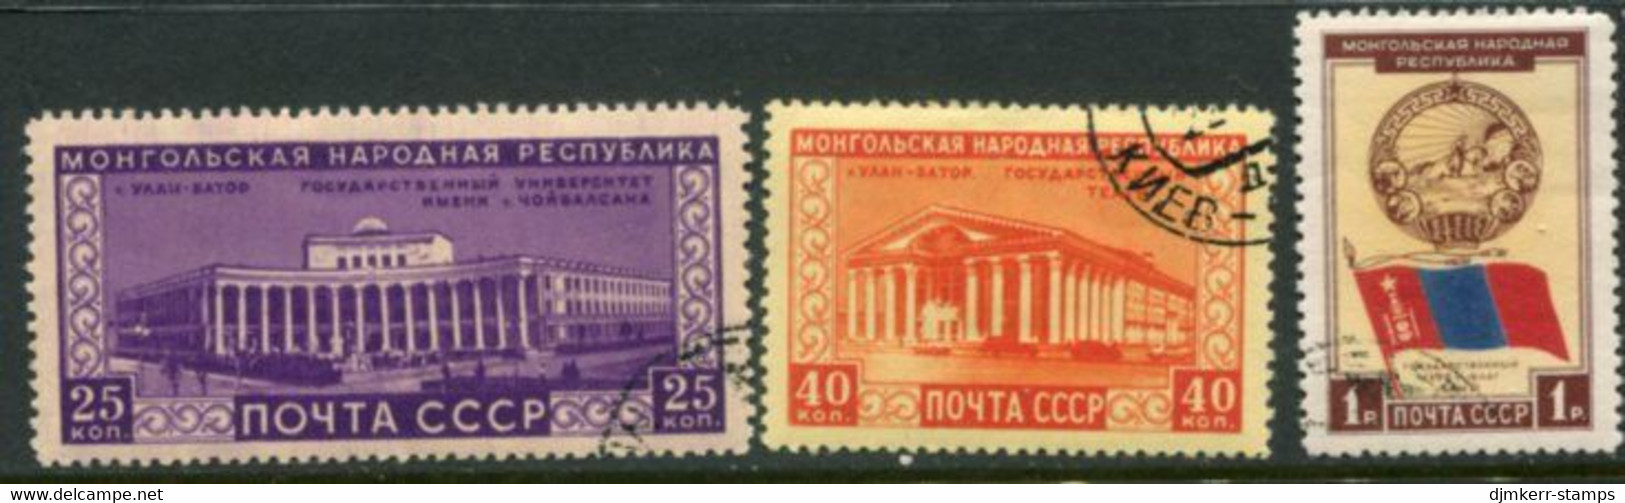 SOVIET UNION 1951 Mongolian People's Republic Used.  Michel 1552-54 - Used Stamps